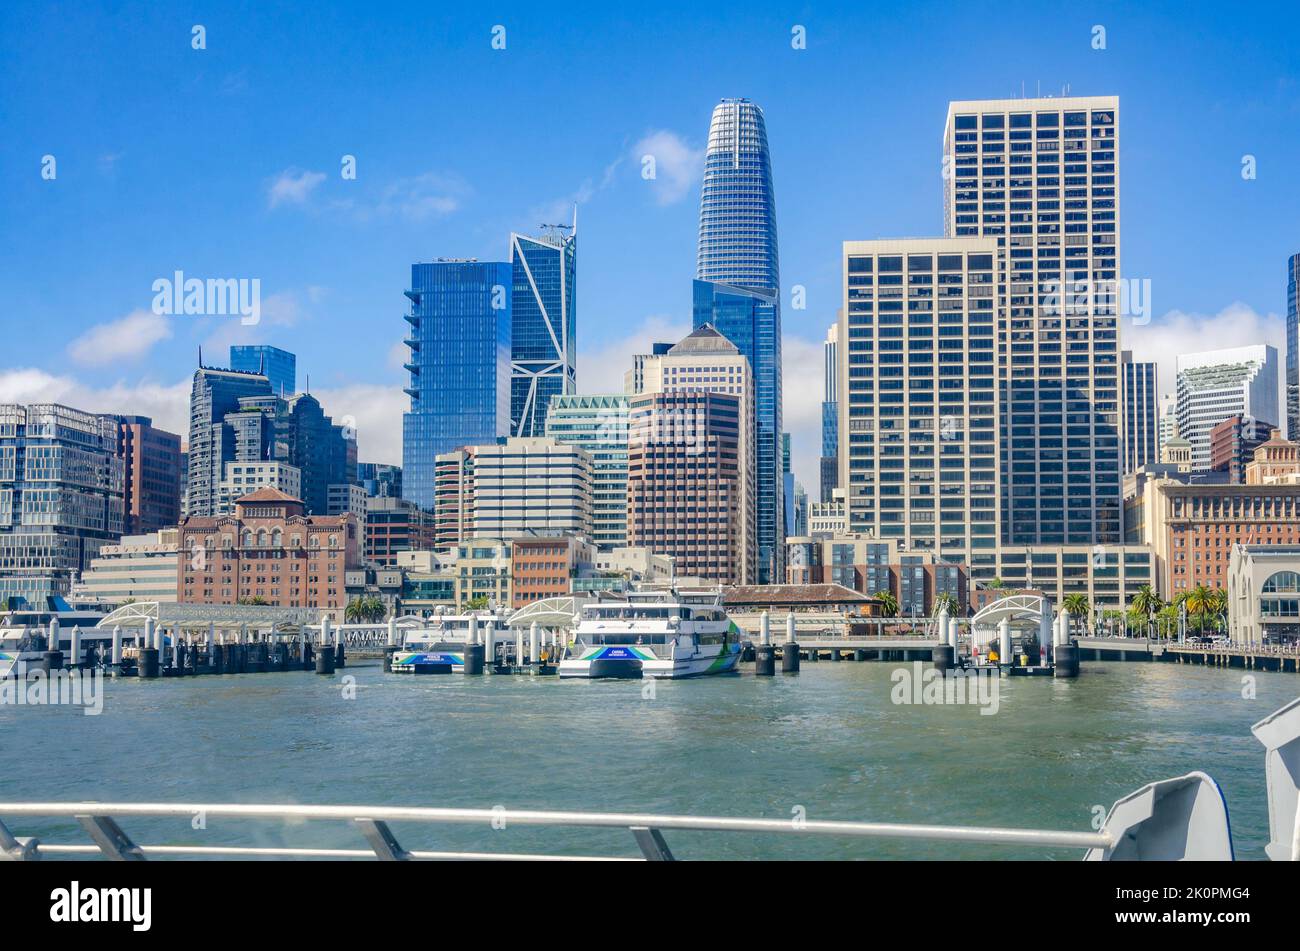 View of skyscrapers making up part of the San Francisco skyline seen from the back of a departing San Francisco Bay Ferry Stock Photo